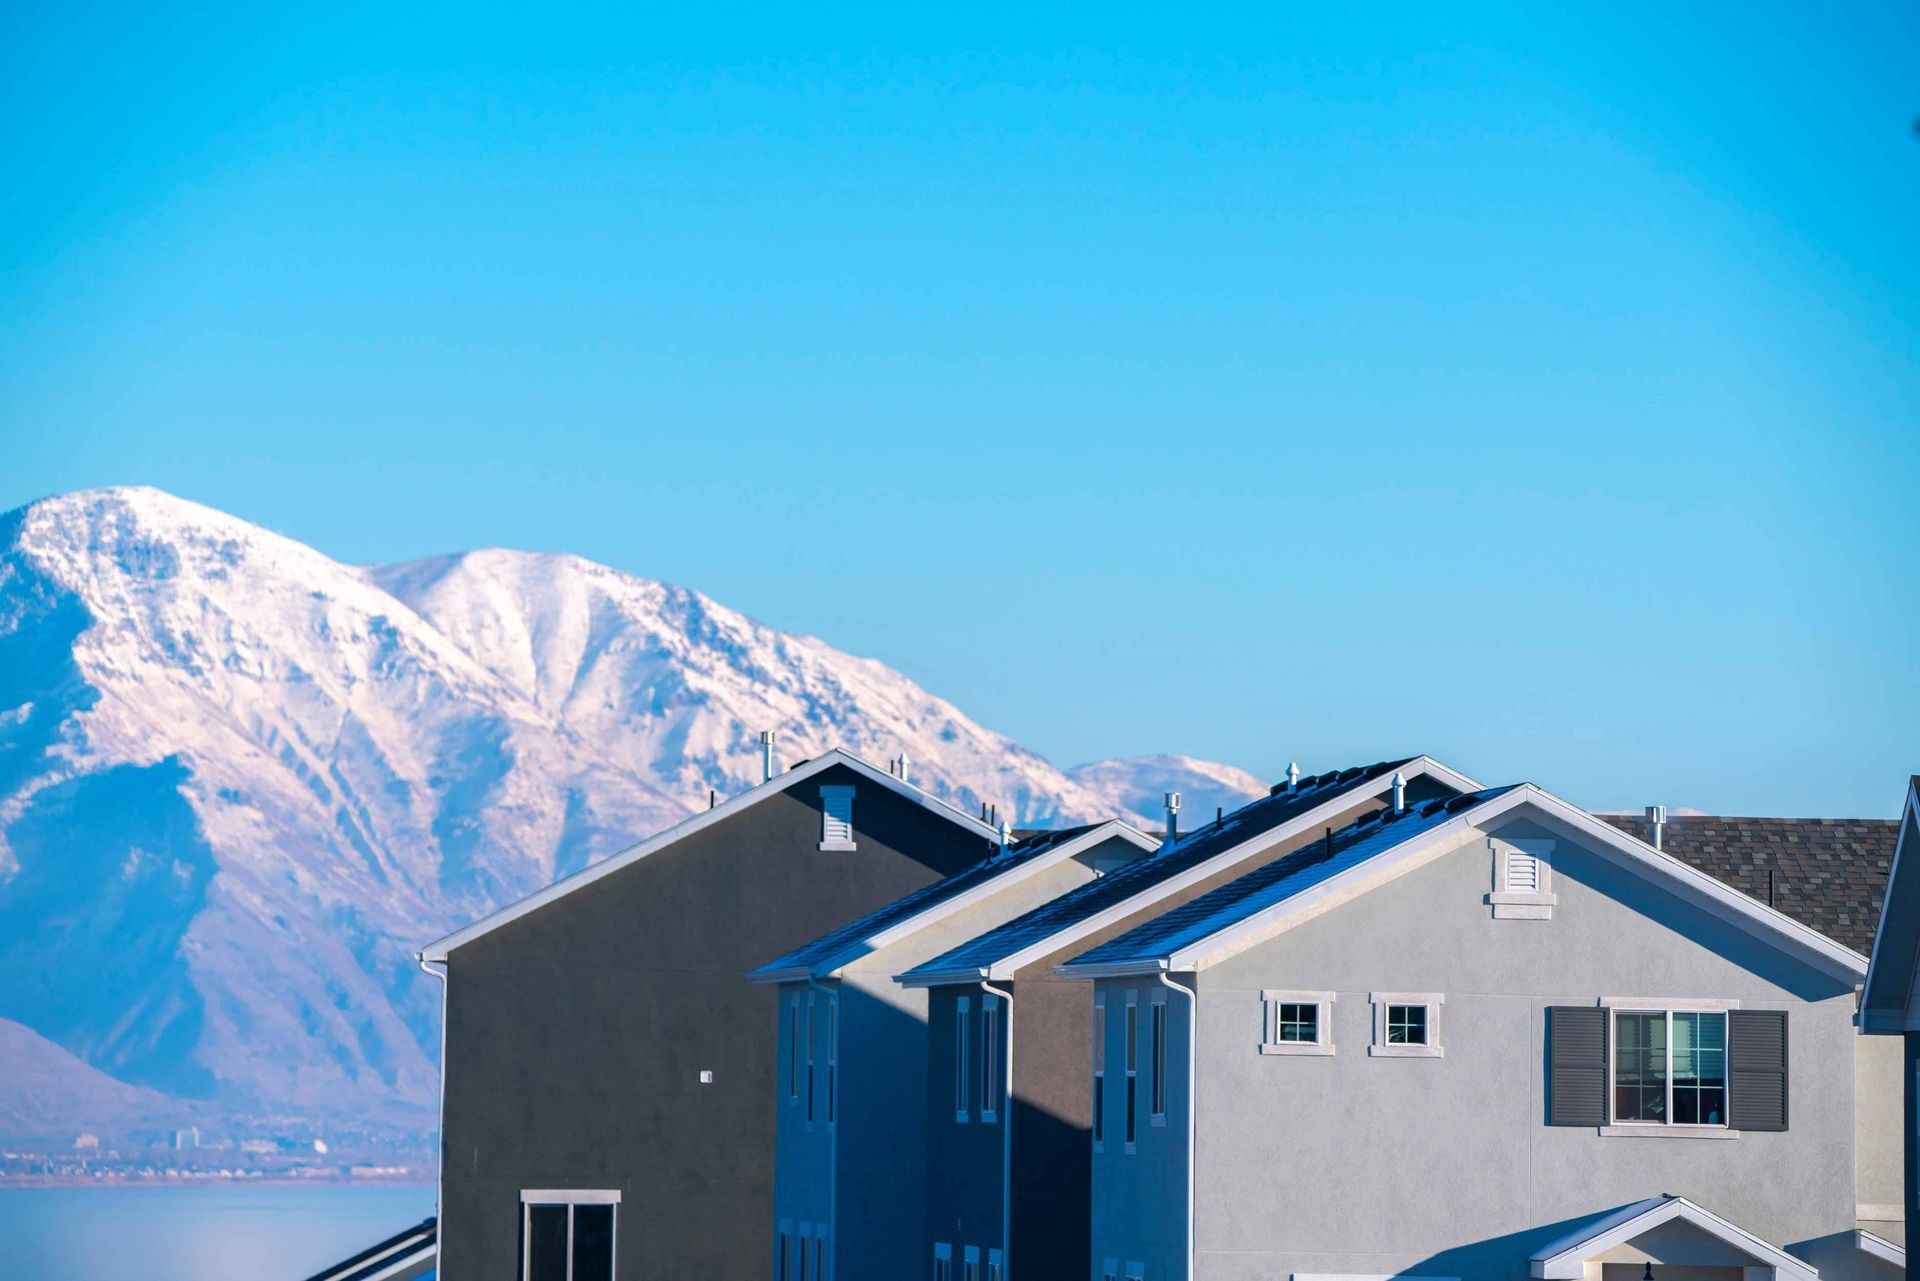 An exterior real estate photo  with mountains in the background